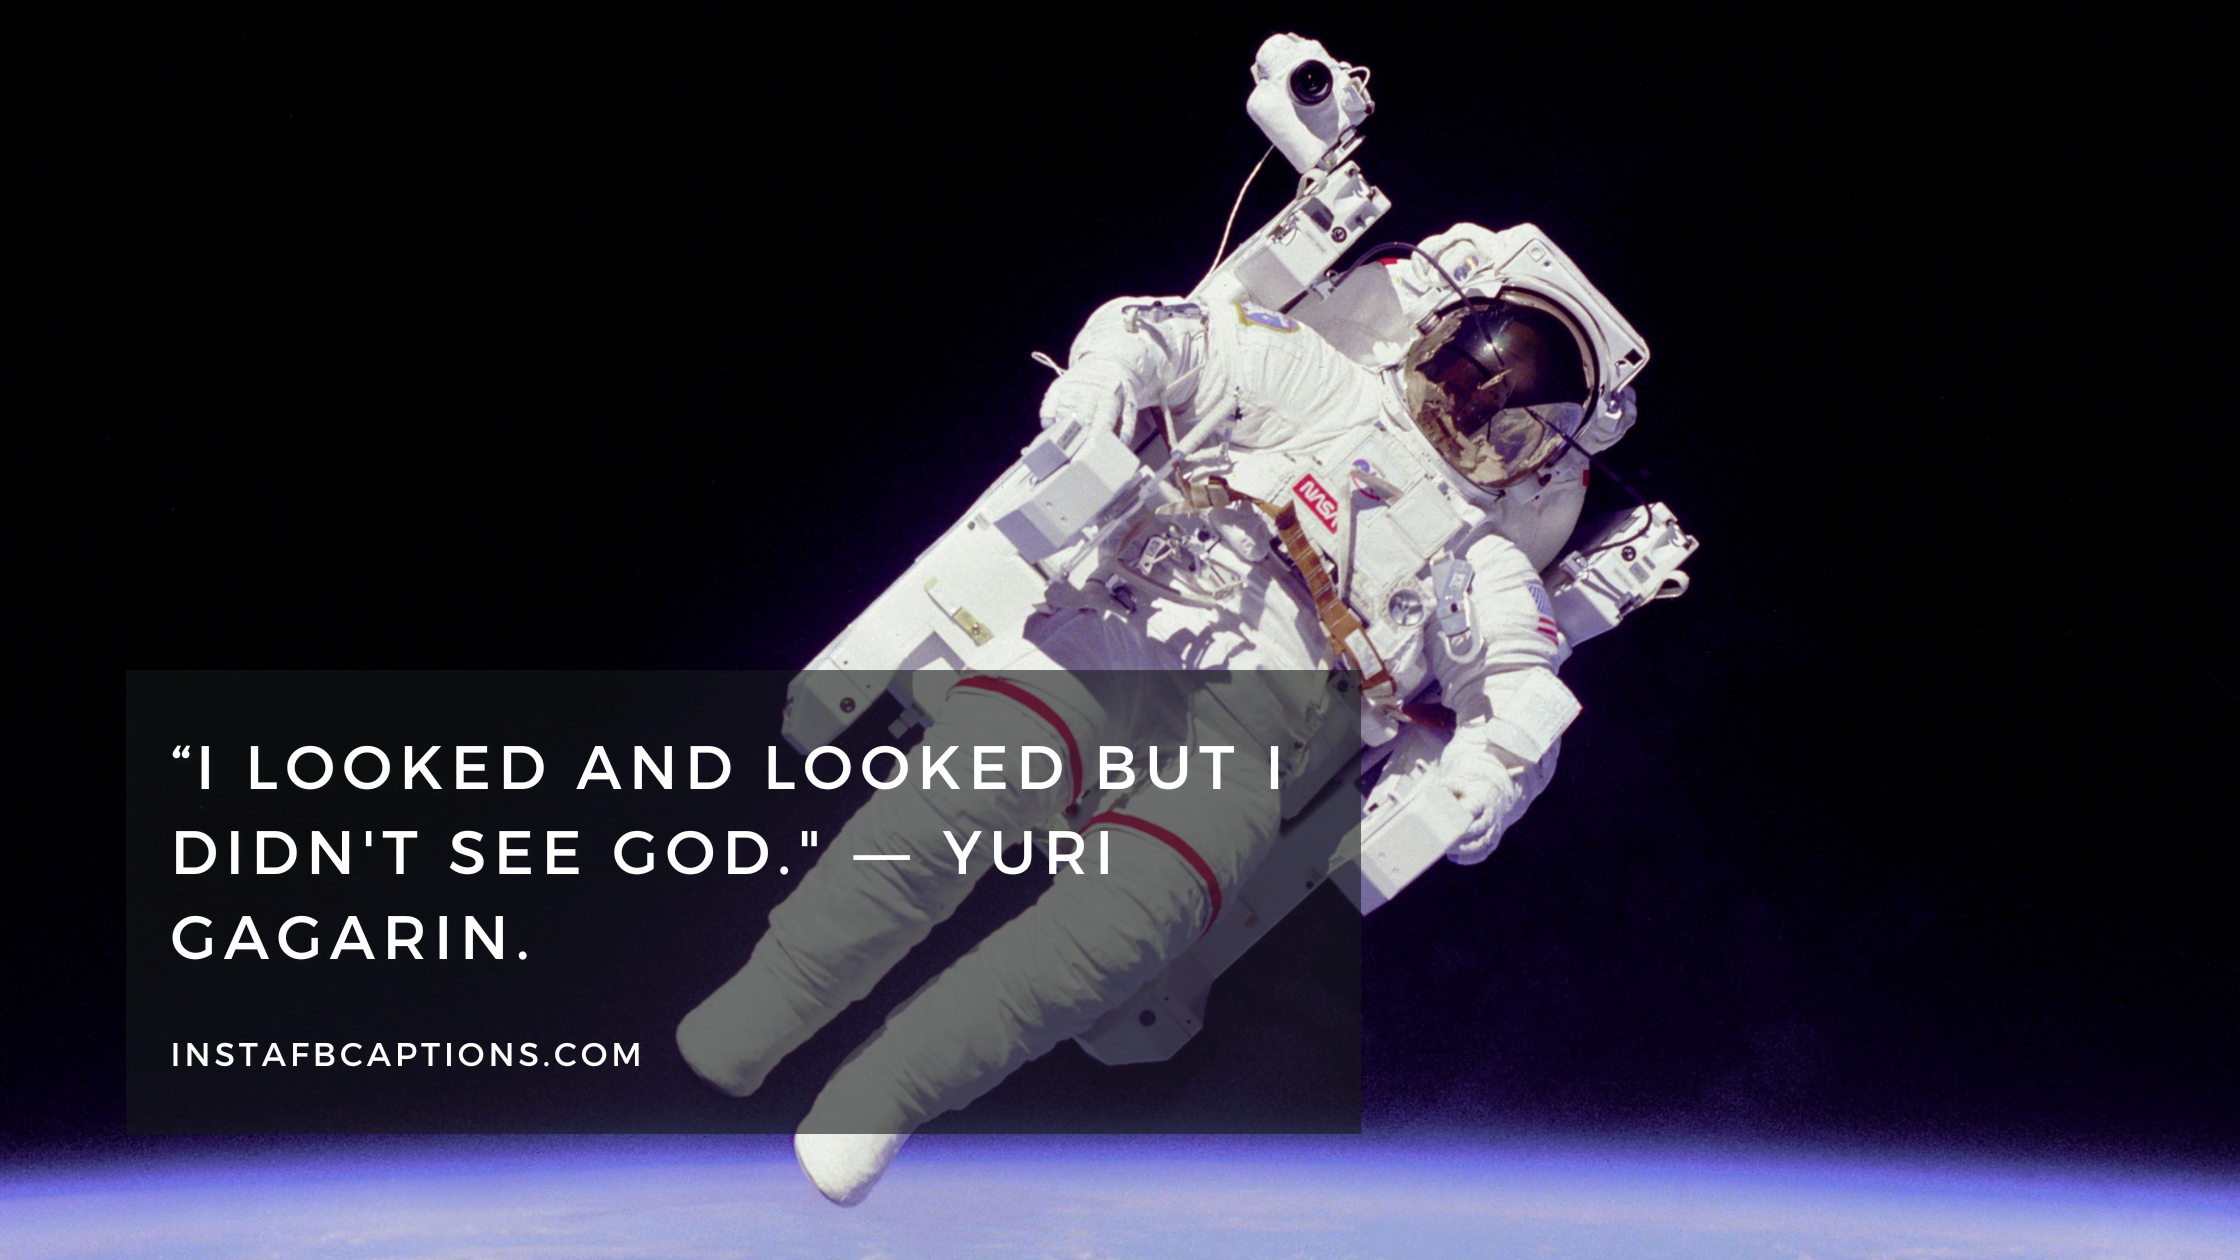 Astronaut Quotes About Earth  - Astronaut Quotes About Earth - [New] Astronaut Captions Quotes for Instagram in 2023